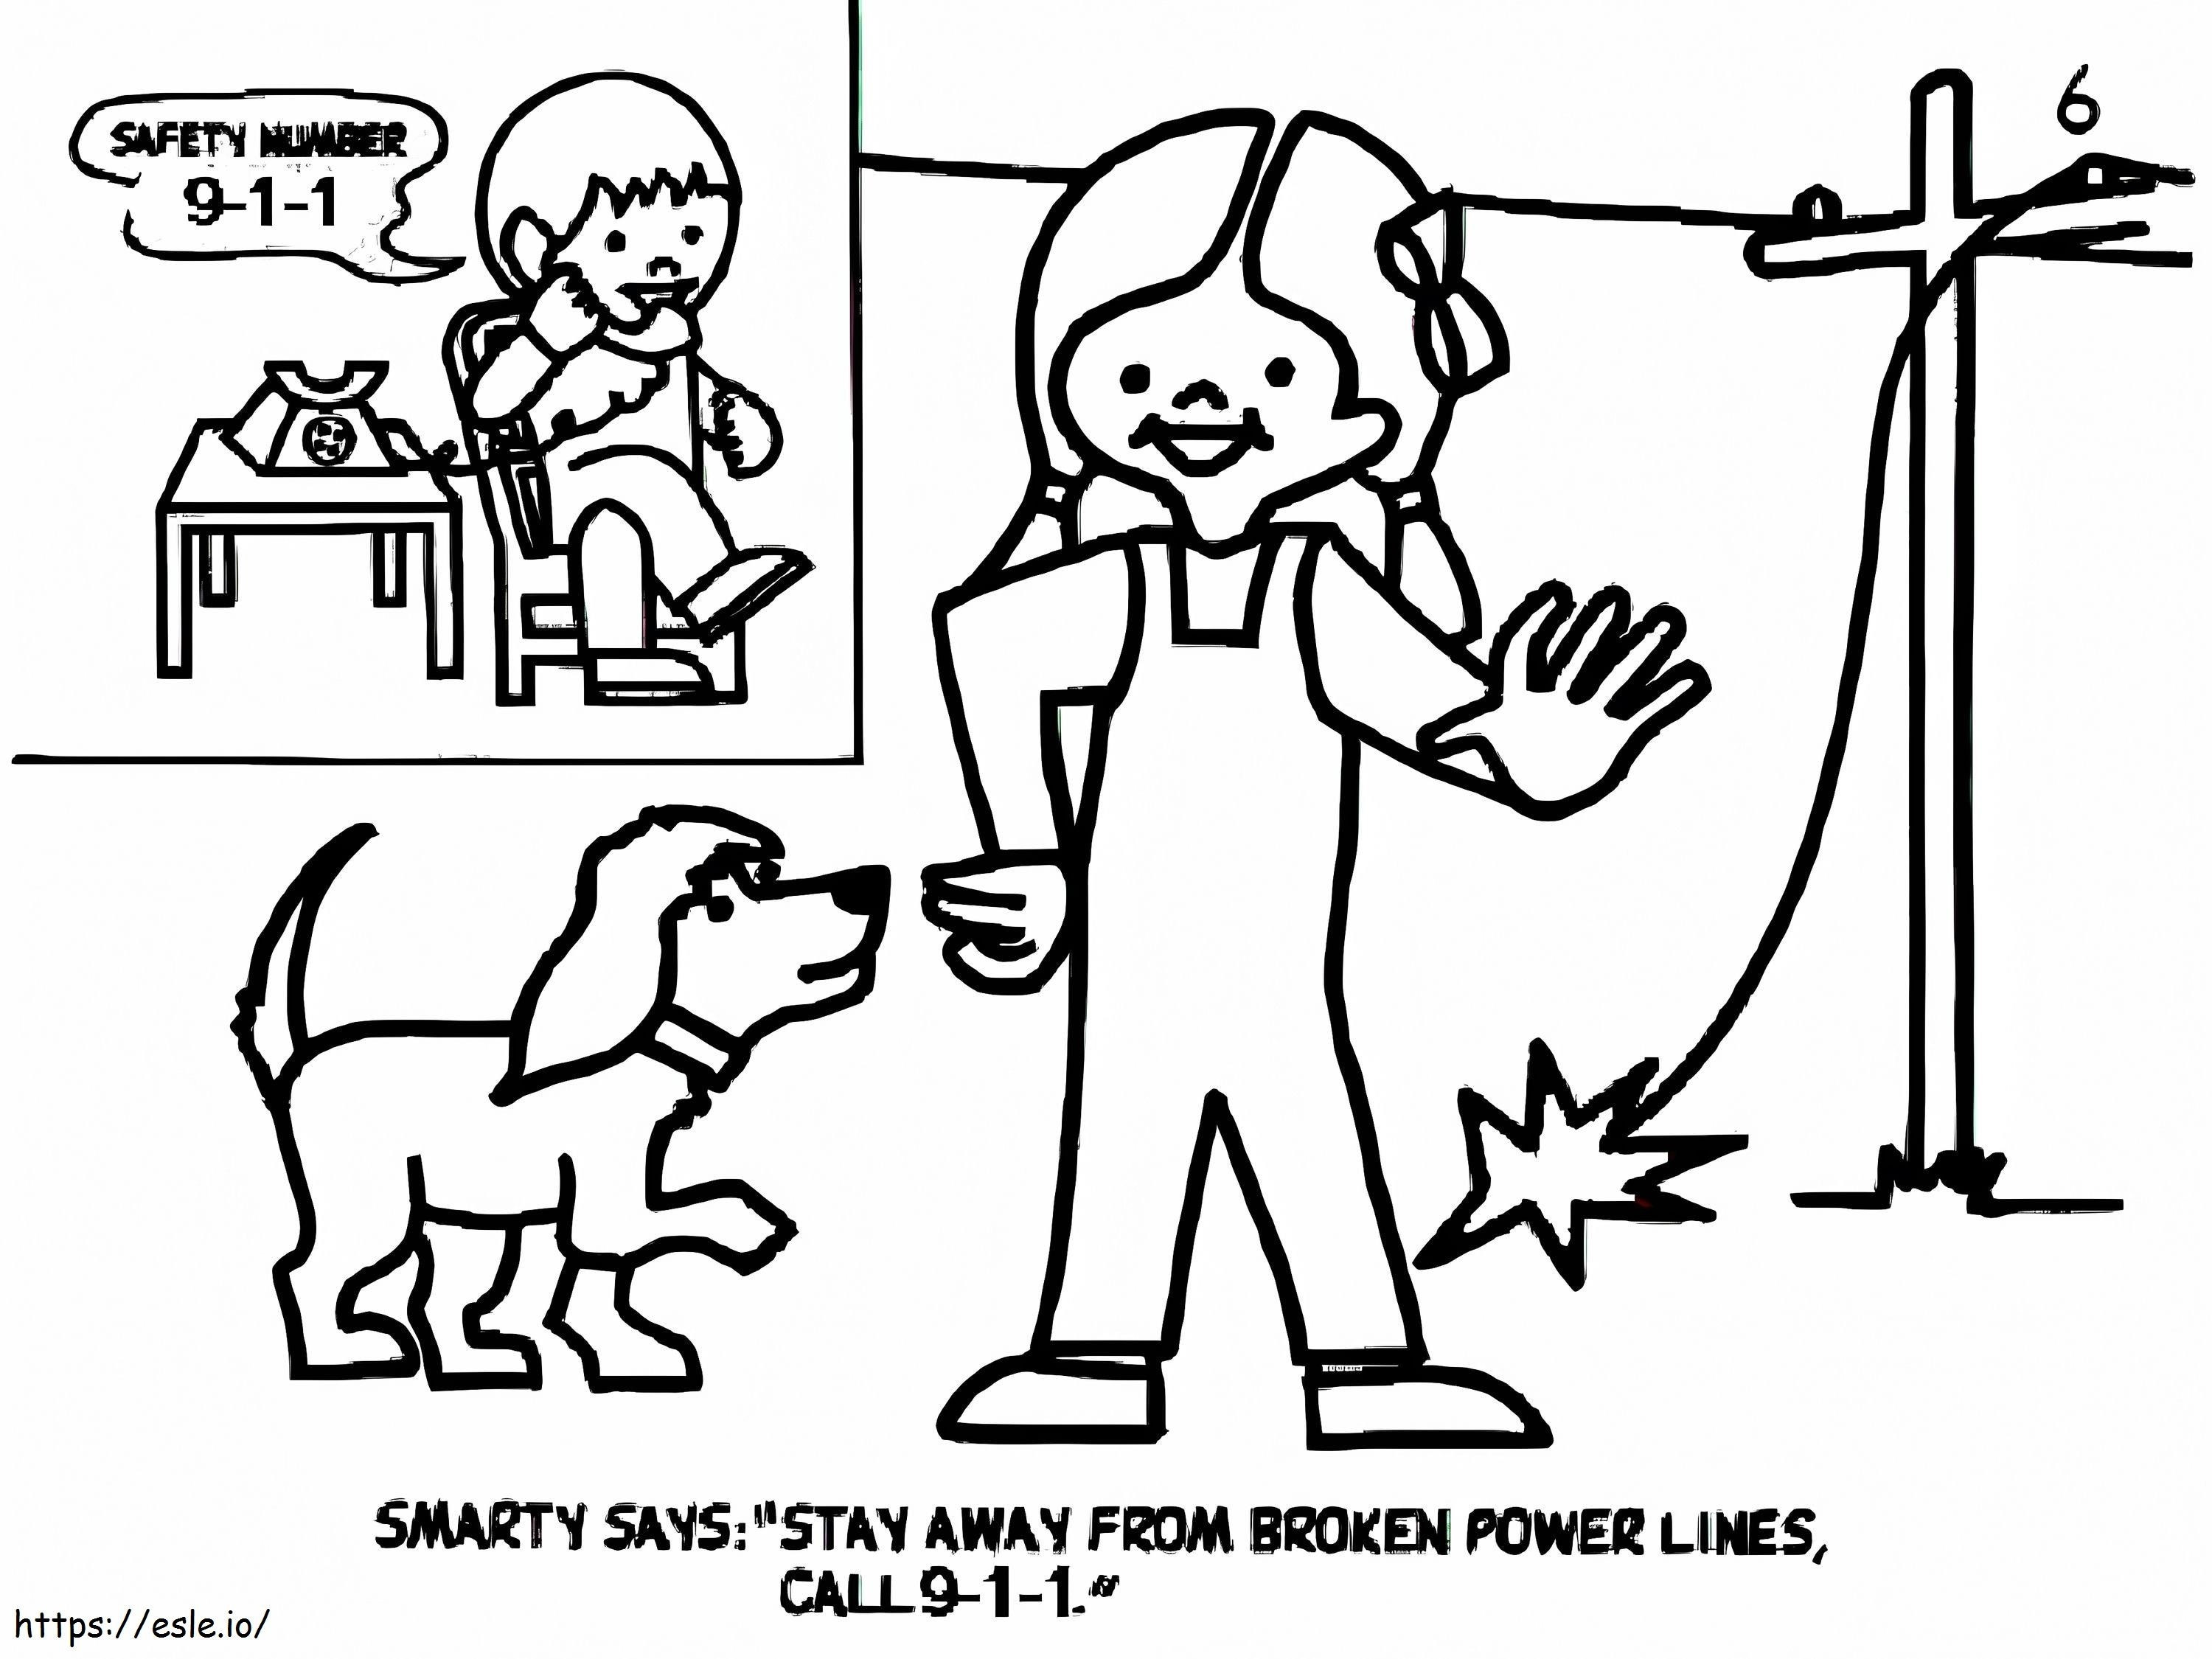 Broken Power Lines Safety coloring page